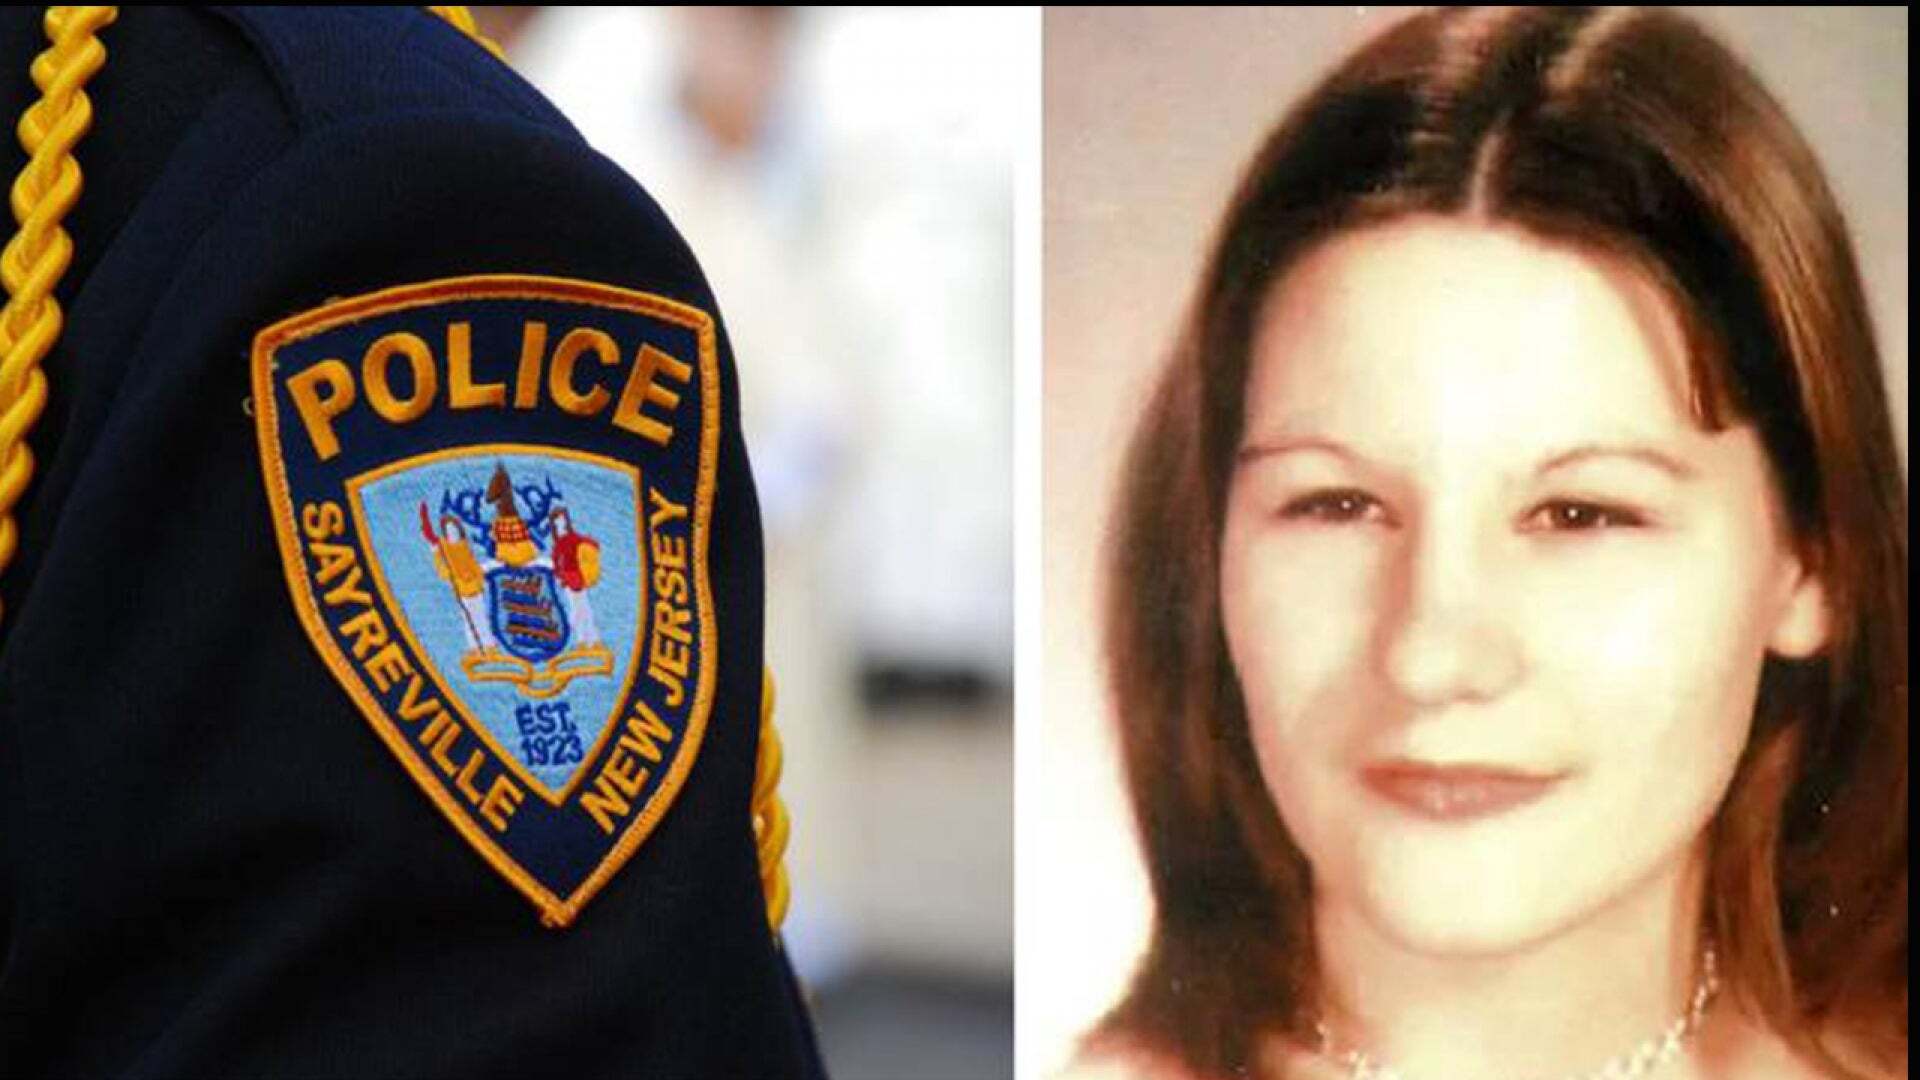 [IMAGE] New Jersey Man Has Been Charged With Murder in 1999 Cold Case